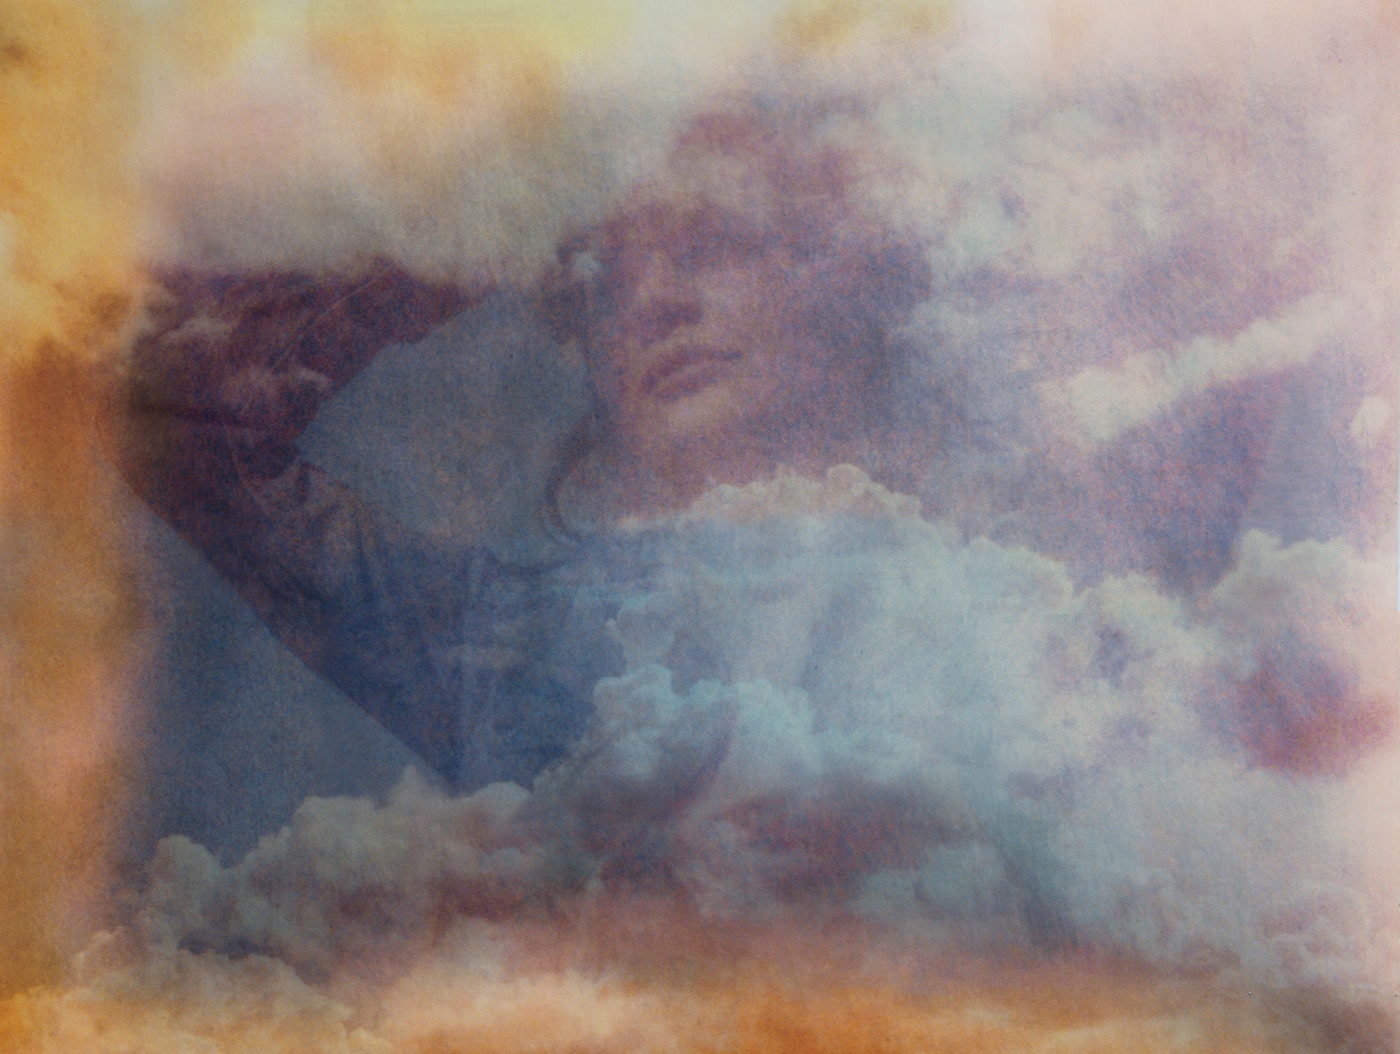 Outdoor portrait of a young woman- Double exposure on messed up Polaroid Film taken against the sky